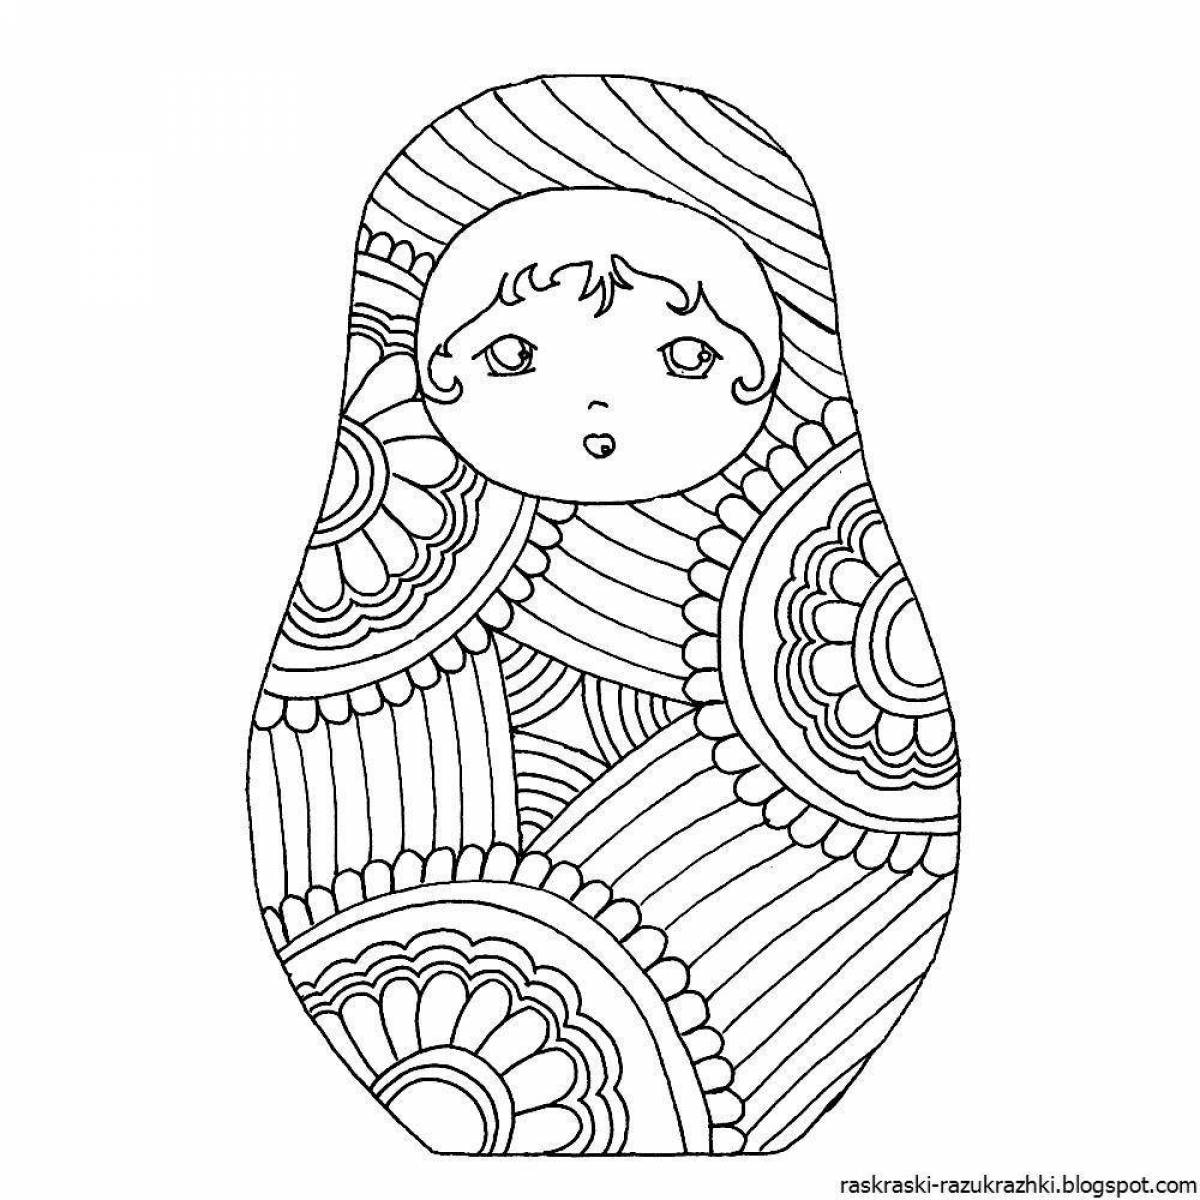 Playful matryoshka coloring book for children 5-6 years old